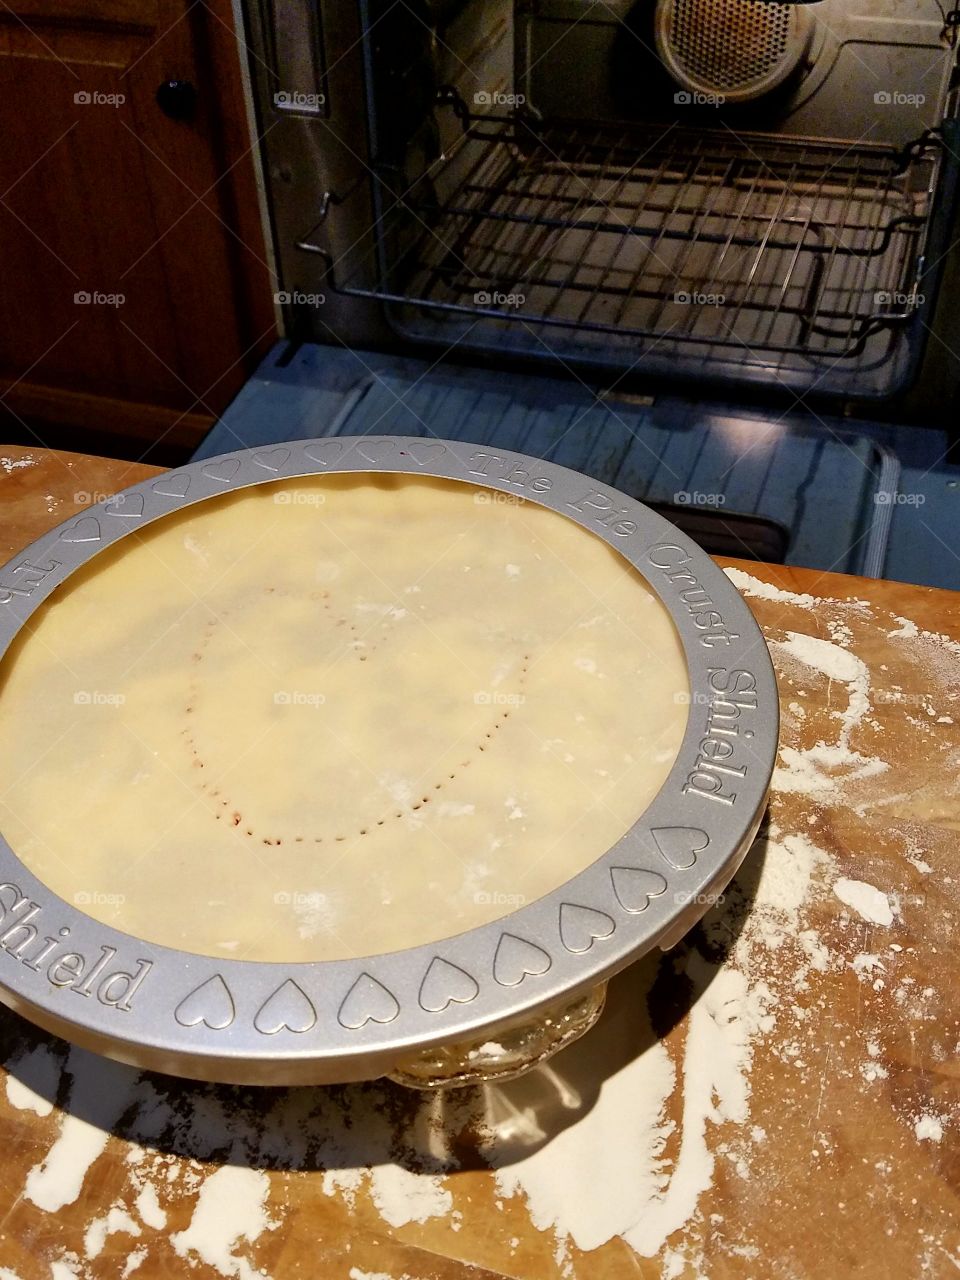 Time to bake the homemade pie.